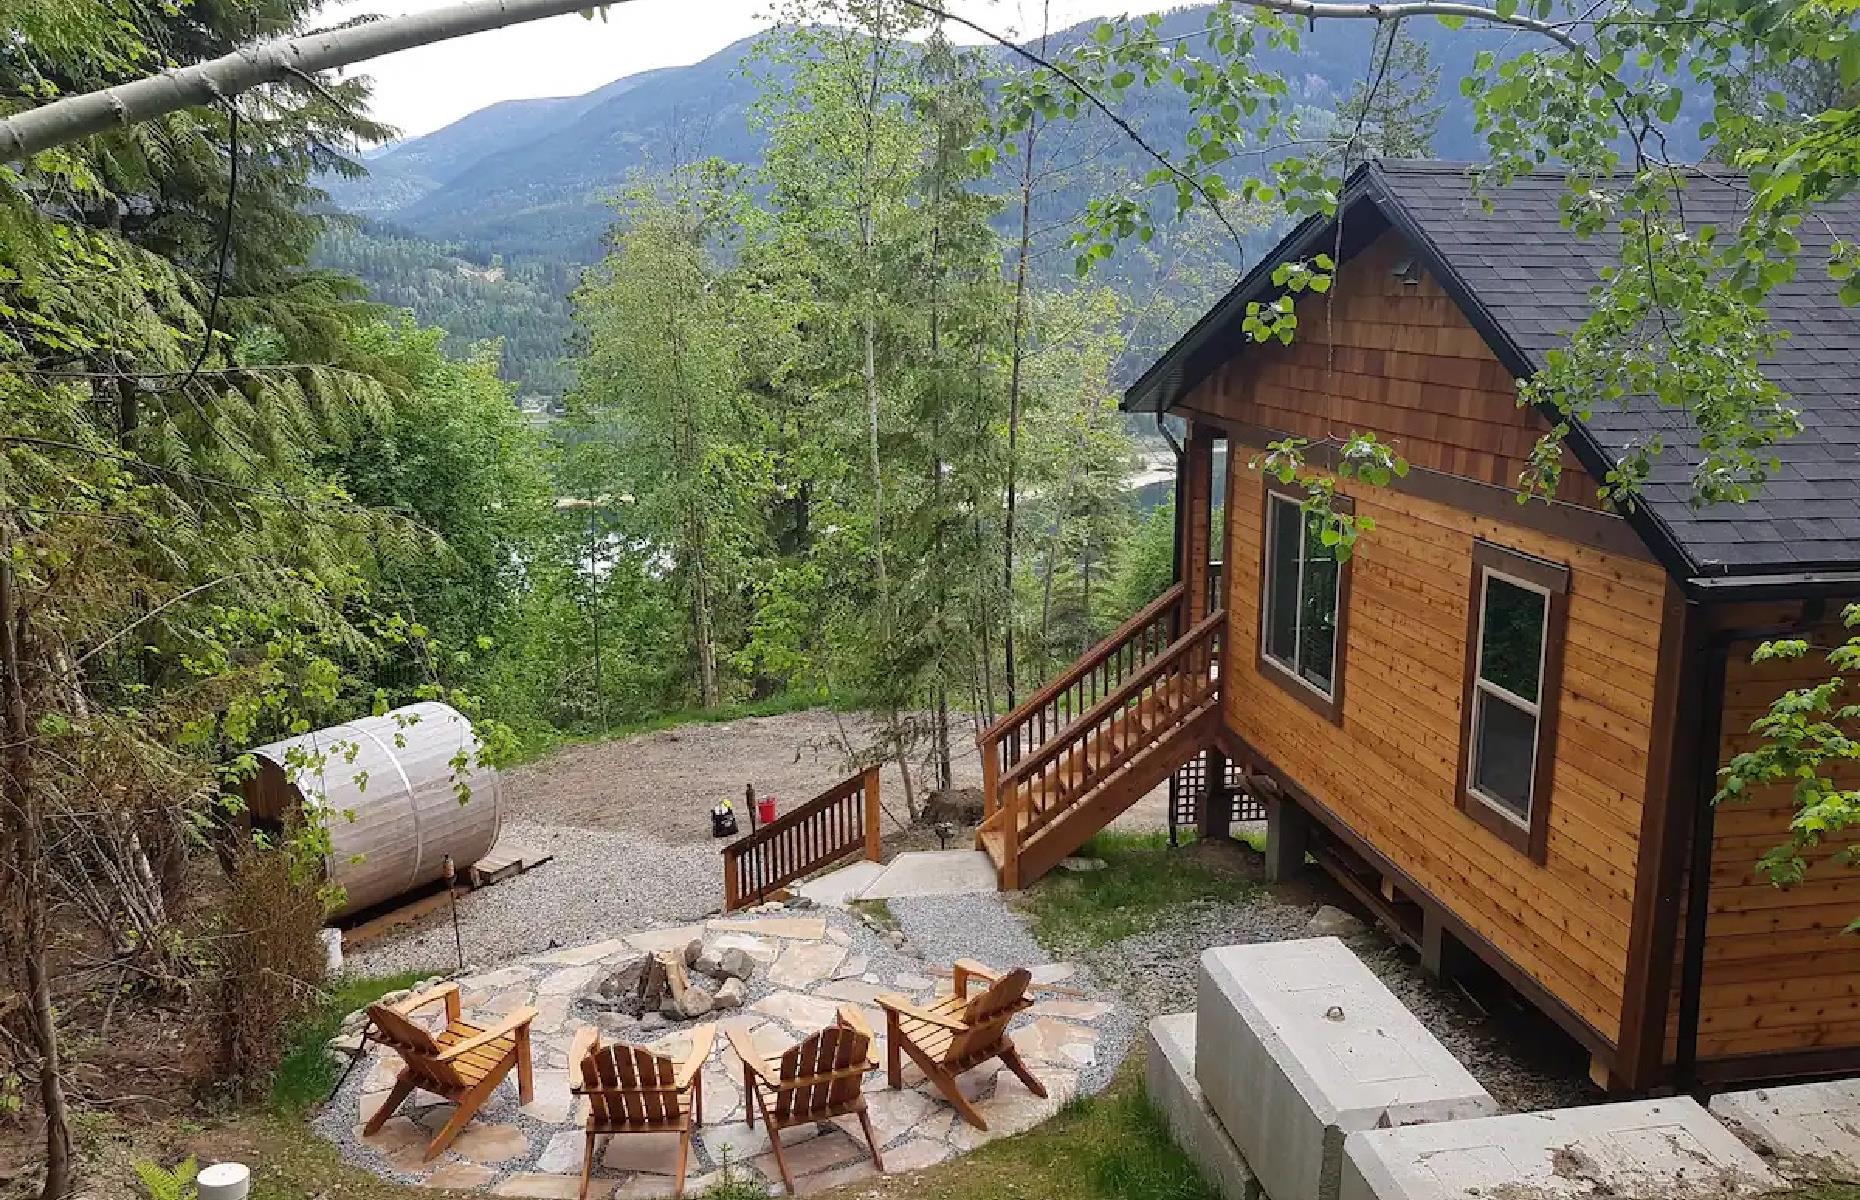 <p>The city of Nelson in the heart of BC tends to attract nature lovers and people who are generally looking to get away from the trappings of big city life. Fir, cedar and elm trees surround this <a href="https://www.airbnb.co.uk/rooms/21152663?adults=1&category_tag=Tag%3A5348&children=0&infants=0&check_in=2022-10-07&check_out=2022-10-12&federated_search_id=39a2ce82-f294-4c23-92c8-bfe11c4229de&source_impression_id=p3_1662844373_OHVAmY%2BDwjUC99R5">rural wood one-bedroom cabin</a>, which is big enough to house four people. There’s a deck that looks out onto Kootenay Lake, but the real selling point is a private, wood-burning, barrel-style sauna located just steps away from the cabin.</p>